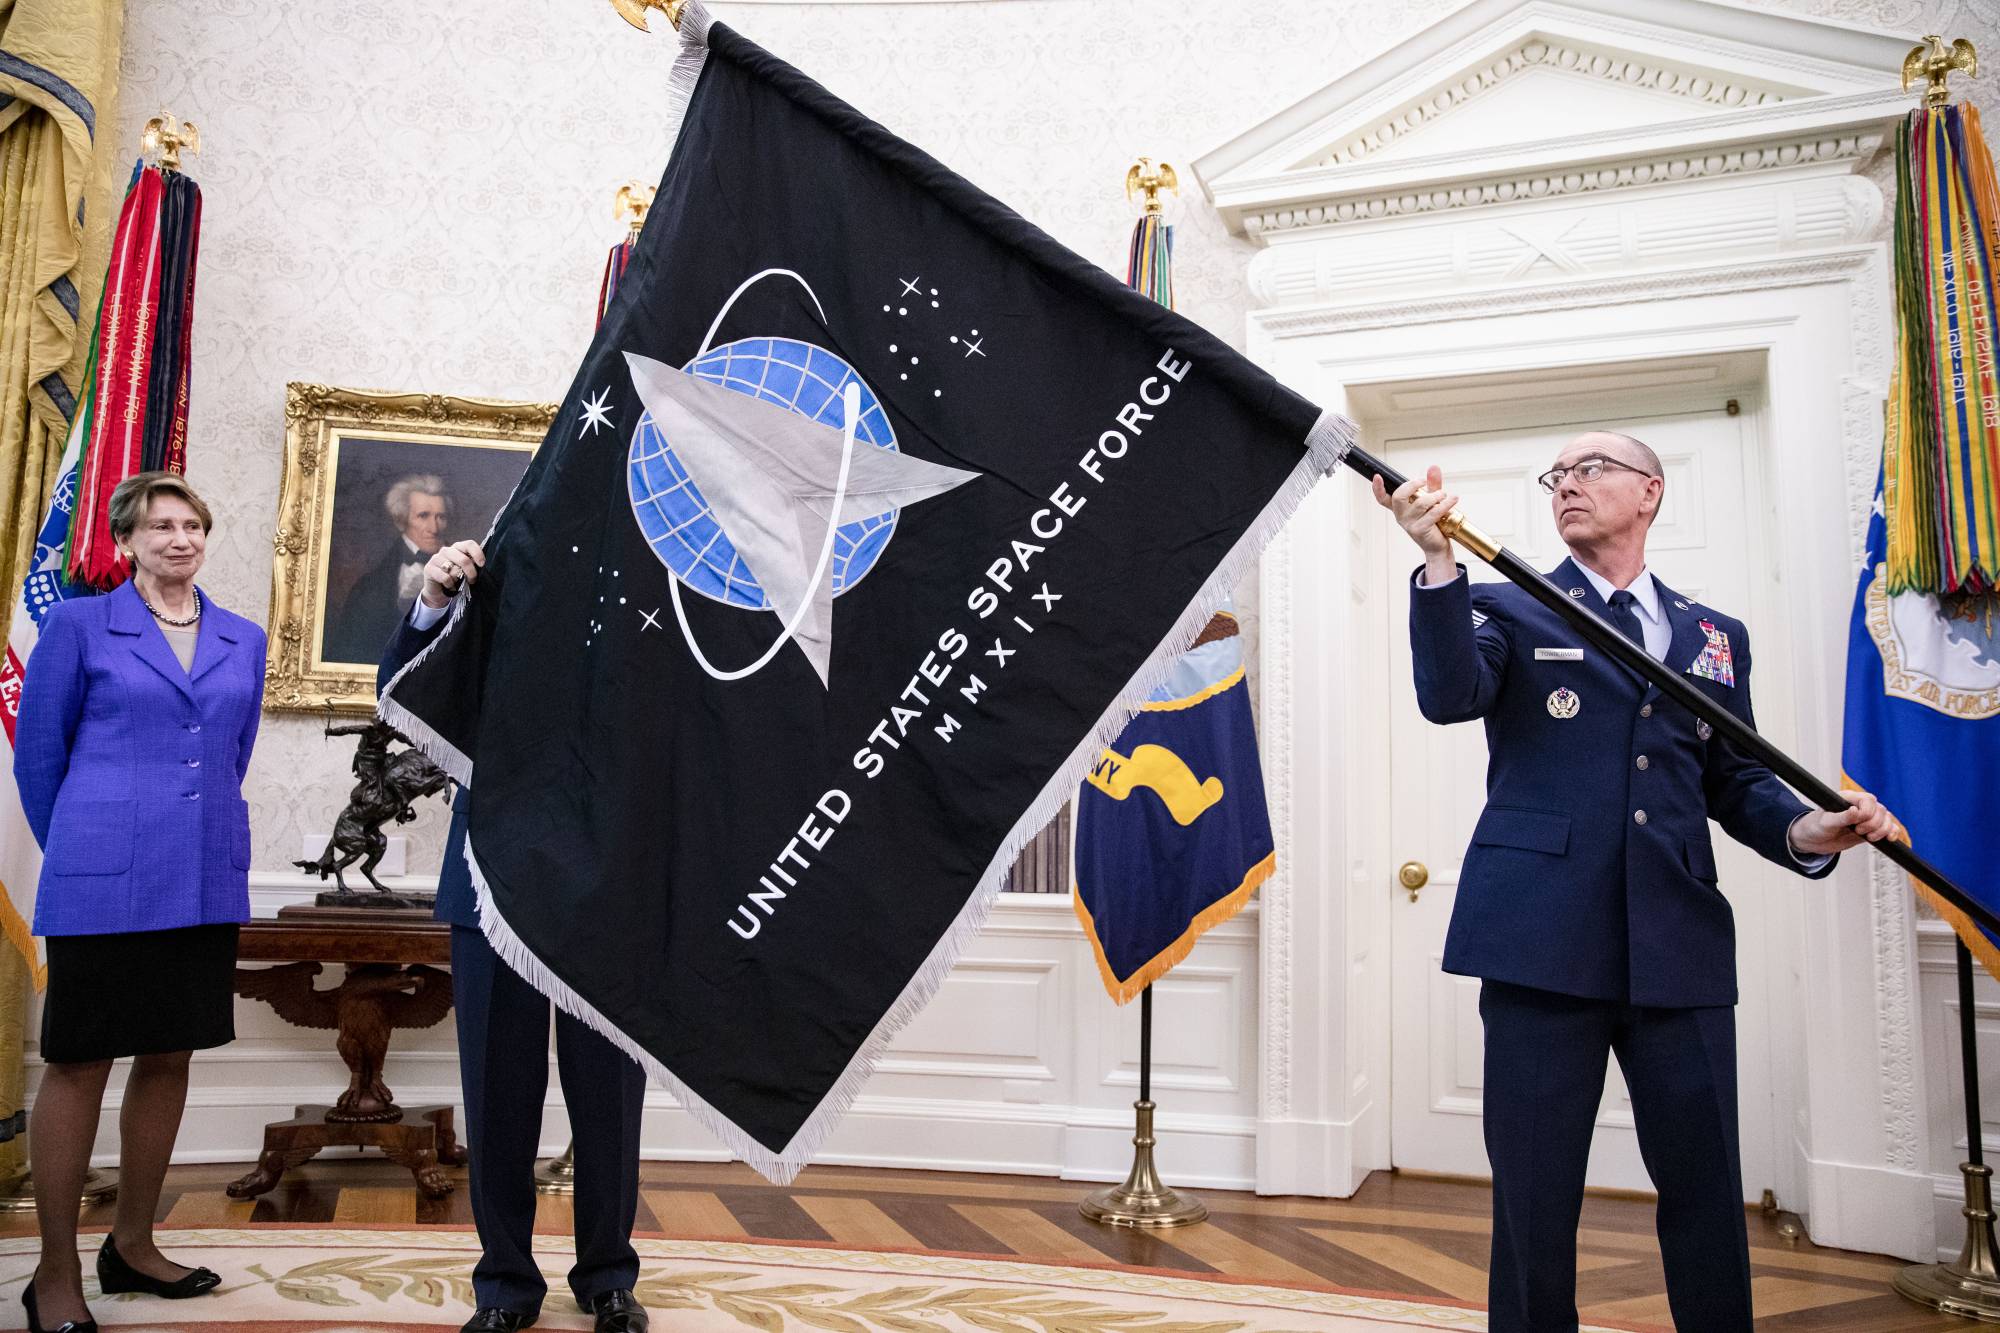 Gen. Jay Raymond, chief of space operations, presents then-U.S. President Donald Trump with the official flag of the space force in the Oval Office at the White House in May last year. | SAMUEL CORUM / THE NEW YORK TIMES